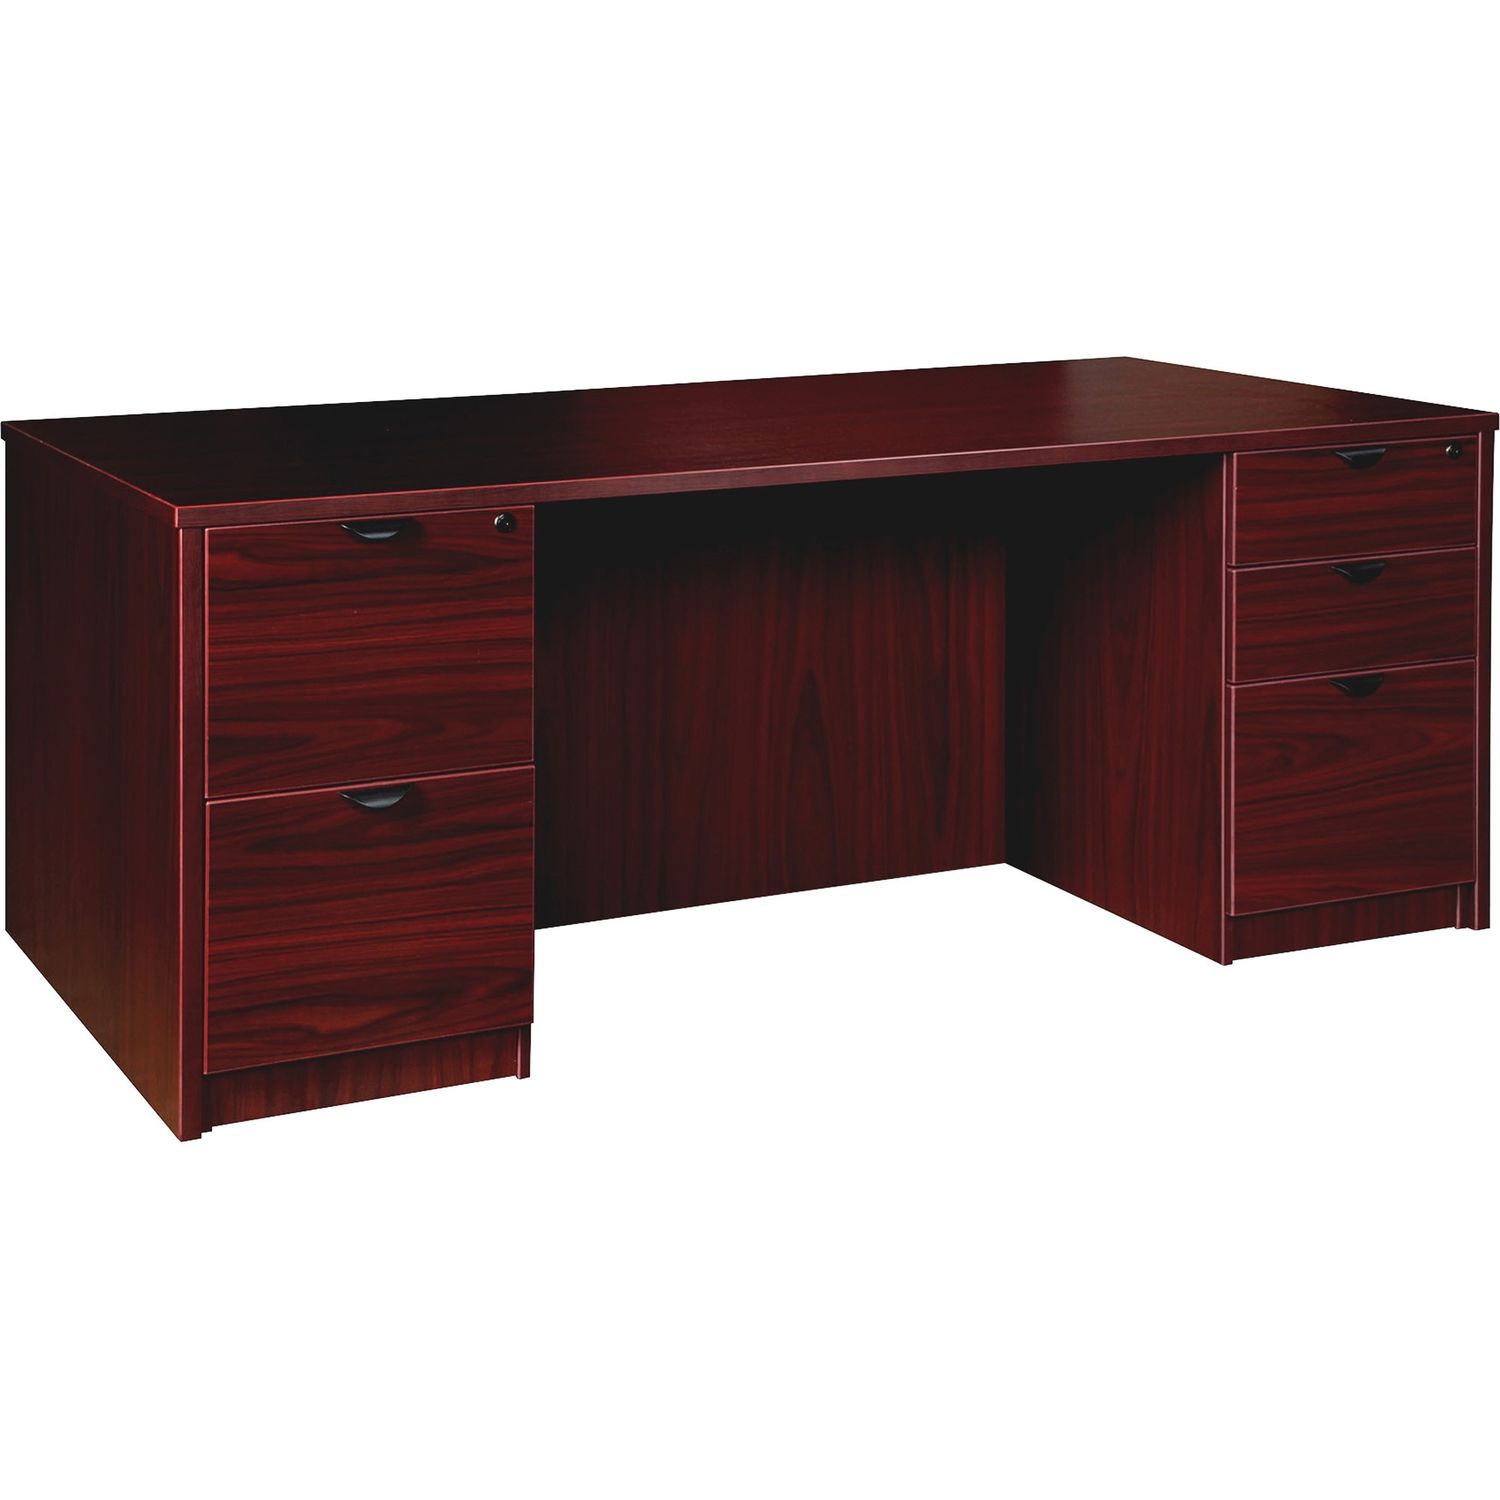 Prominence 2.0 Mahogany Laminate Double-Pedestal Desk - 5-Drawer 1" Top, 72" x 30" x 29", 5 x File Drawer(s), Box Drawer(s), Double Pedestal, Band Edge, Material: Particleboard